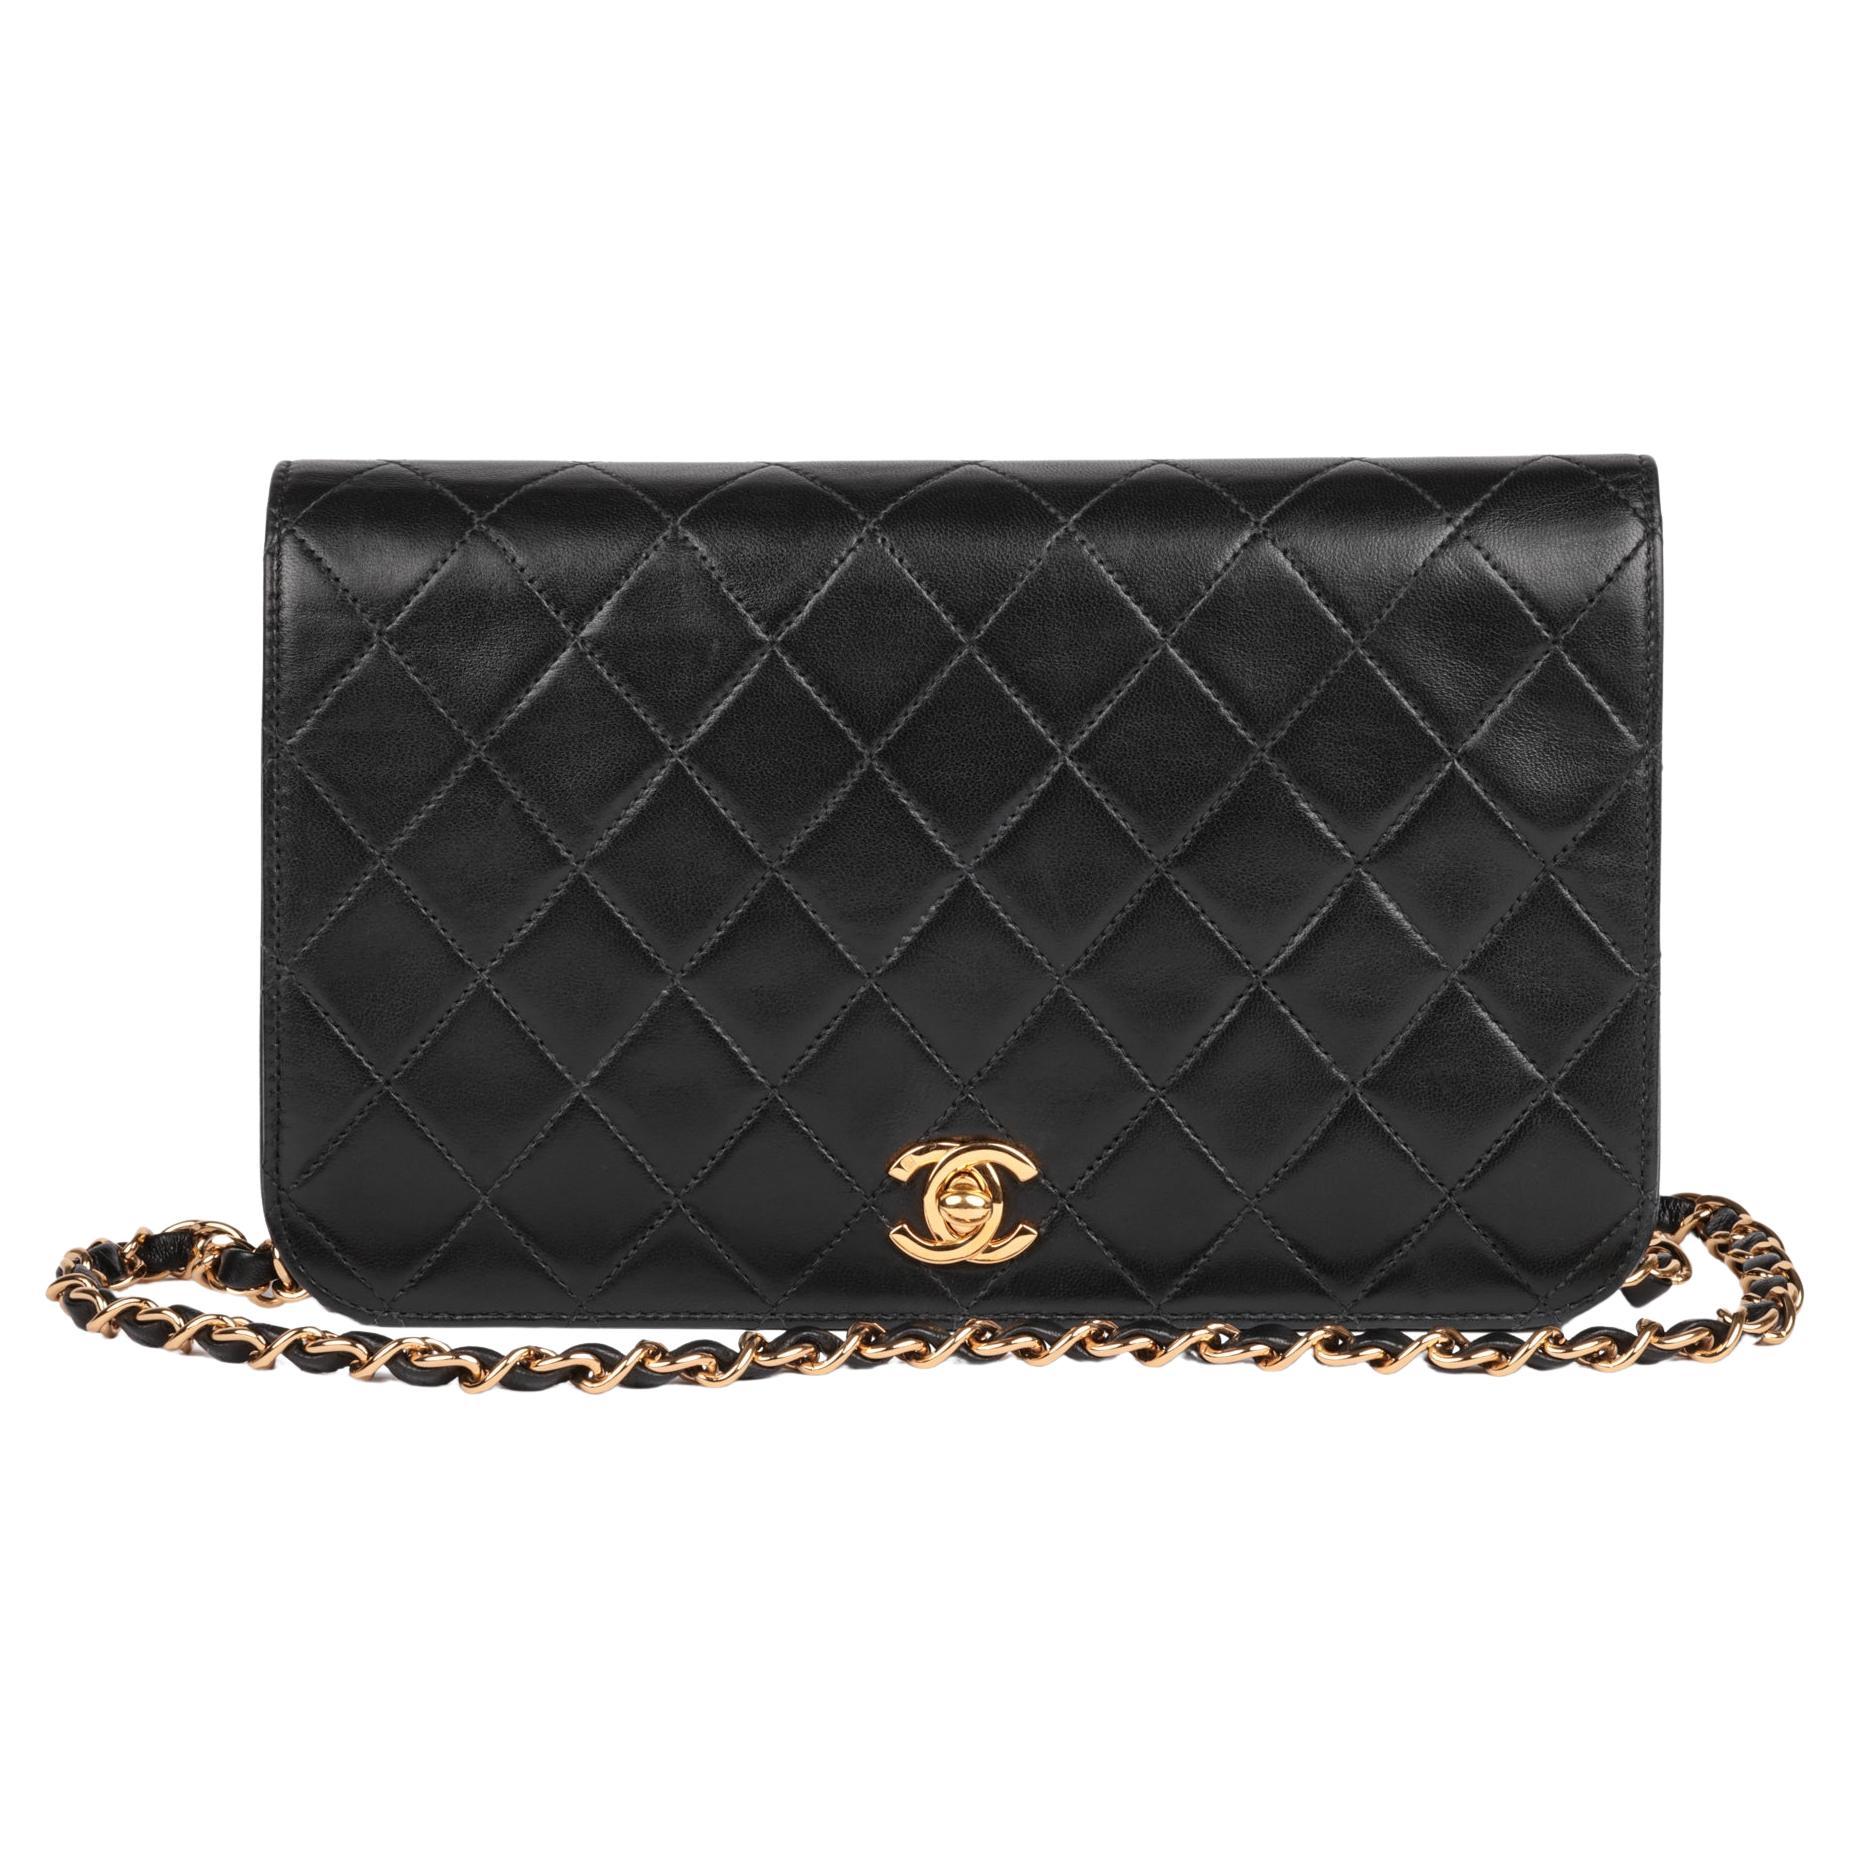 Chanel Has A New Flap Bag That Reminds You Of A Vintage Satchel